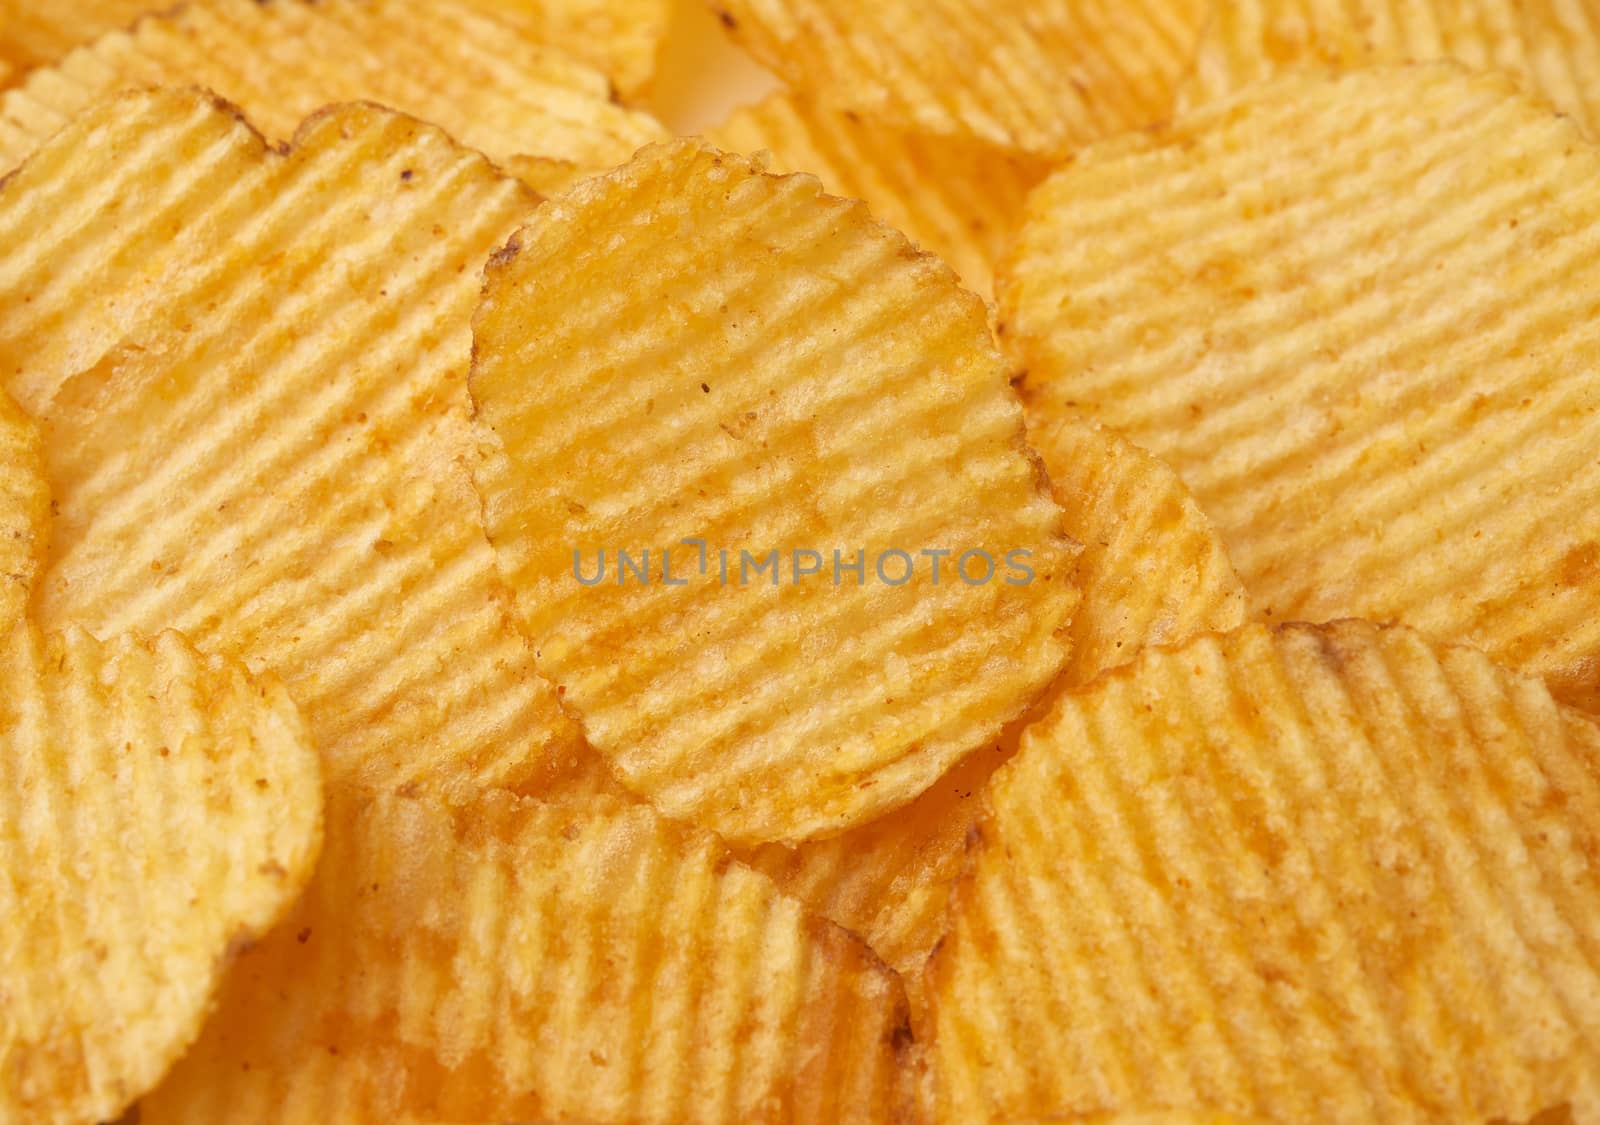 texture of round fried potato corrugated chips, full frame, close up